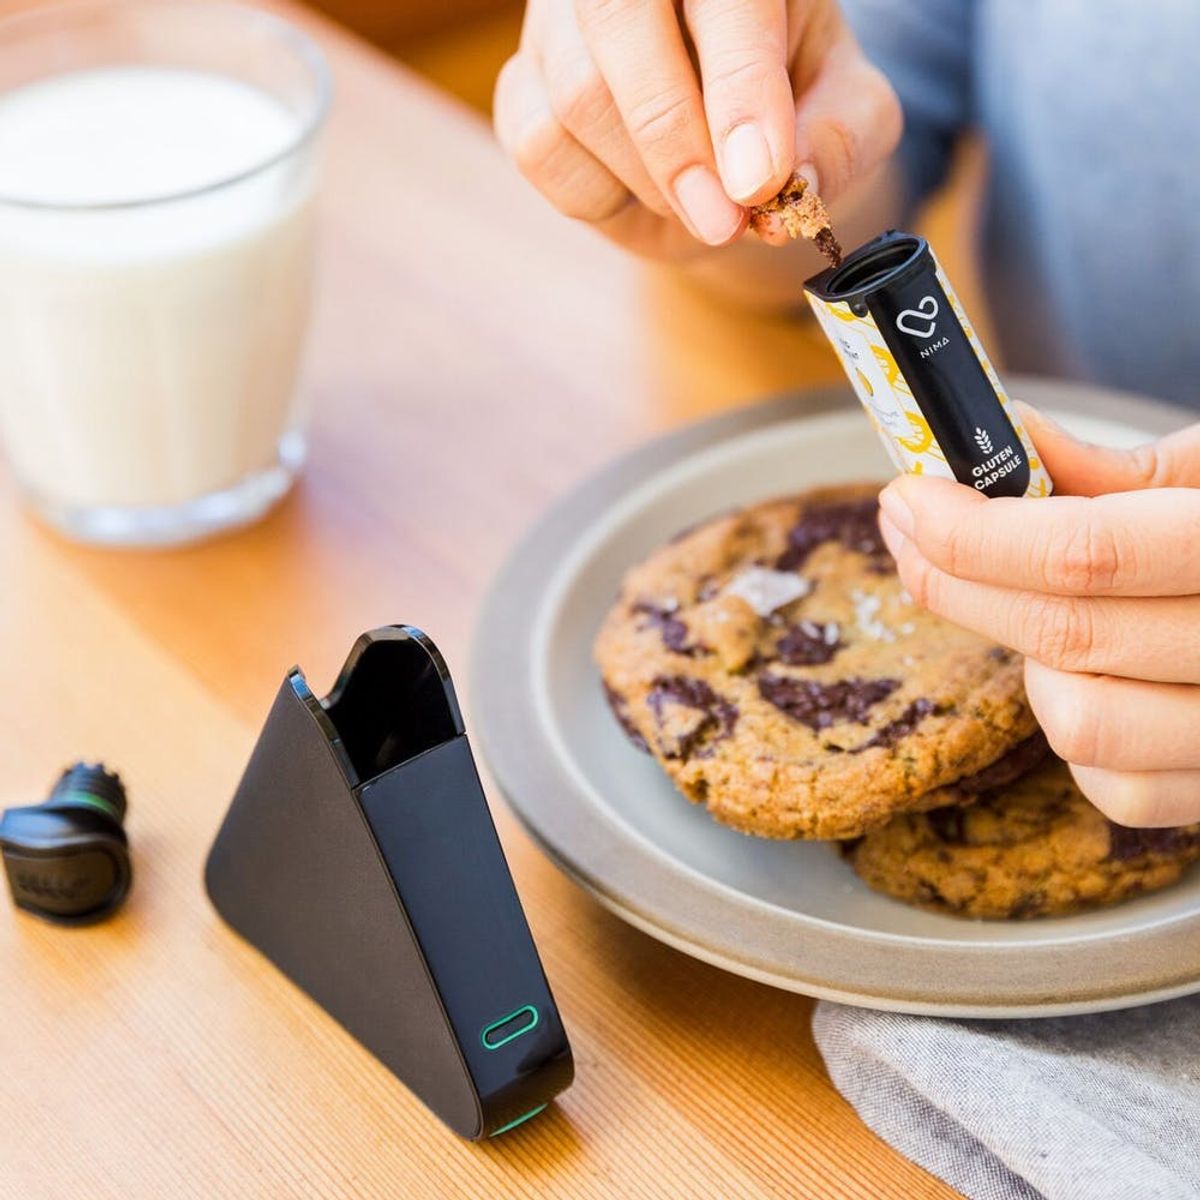 This Game-Changing Gadget Detects Gluten in Your Food in Just 5 Minutes